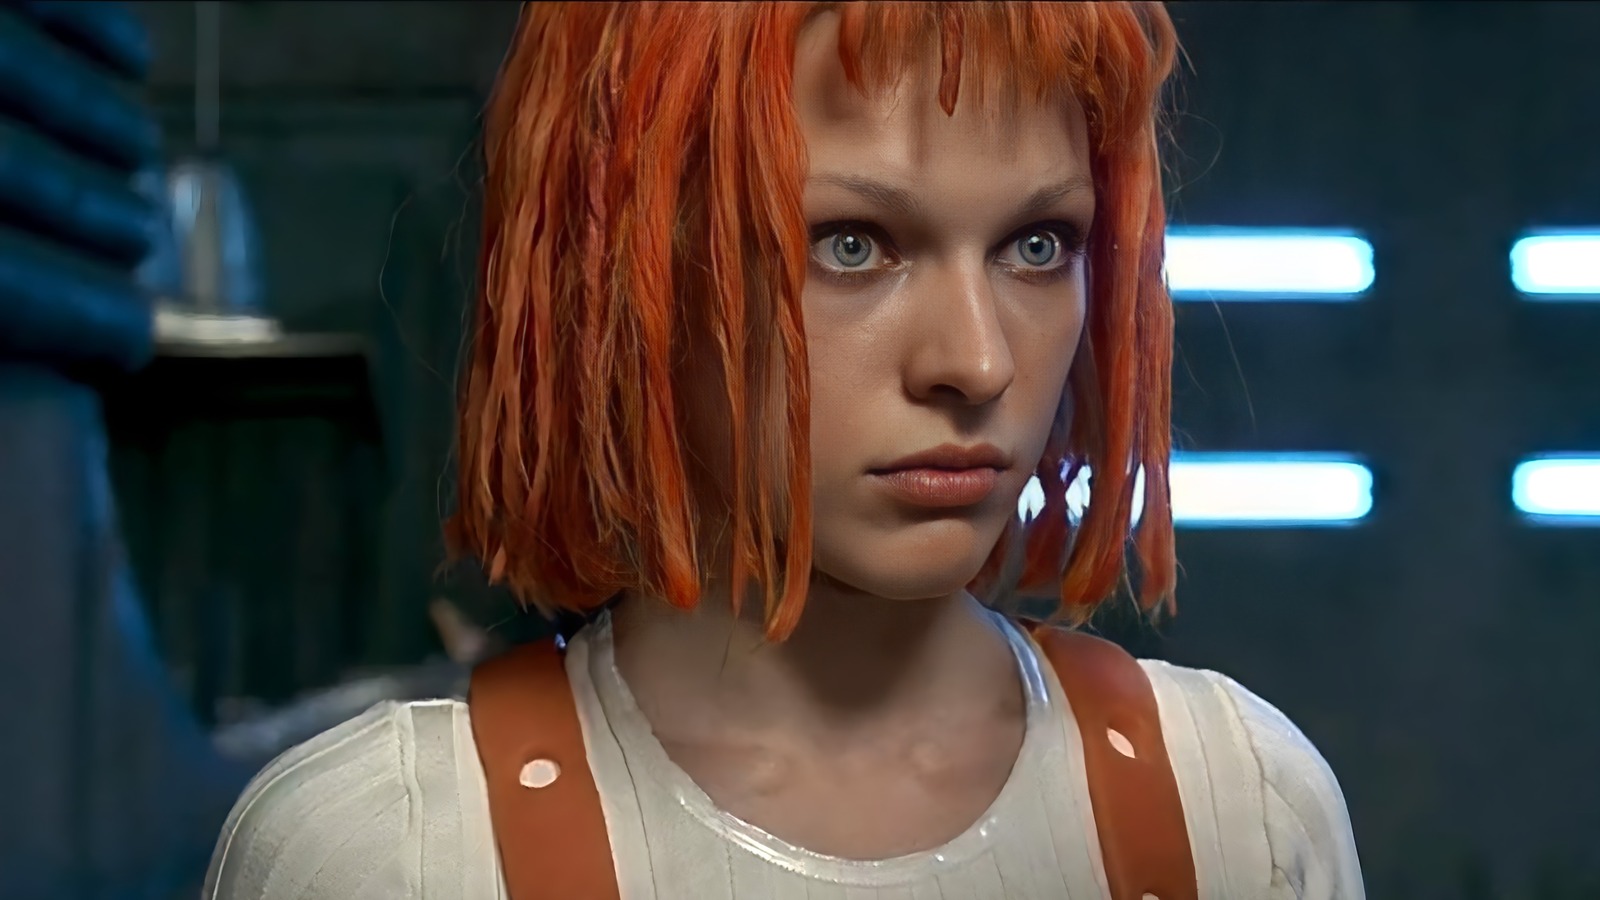 Will we ever see a sequel to The Fifth Element?